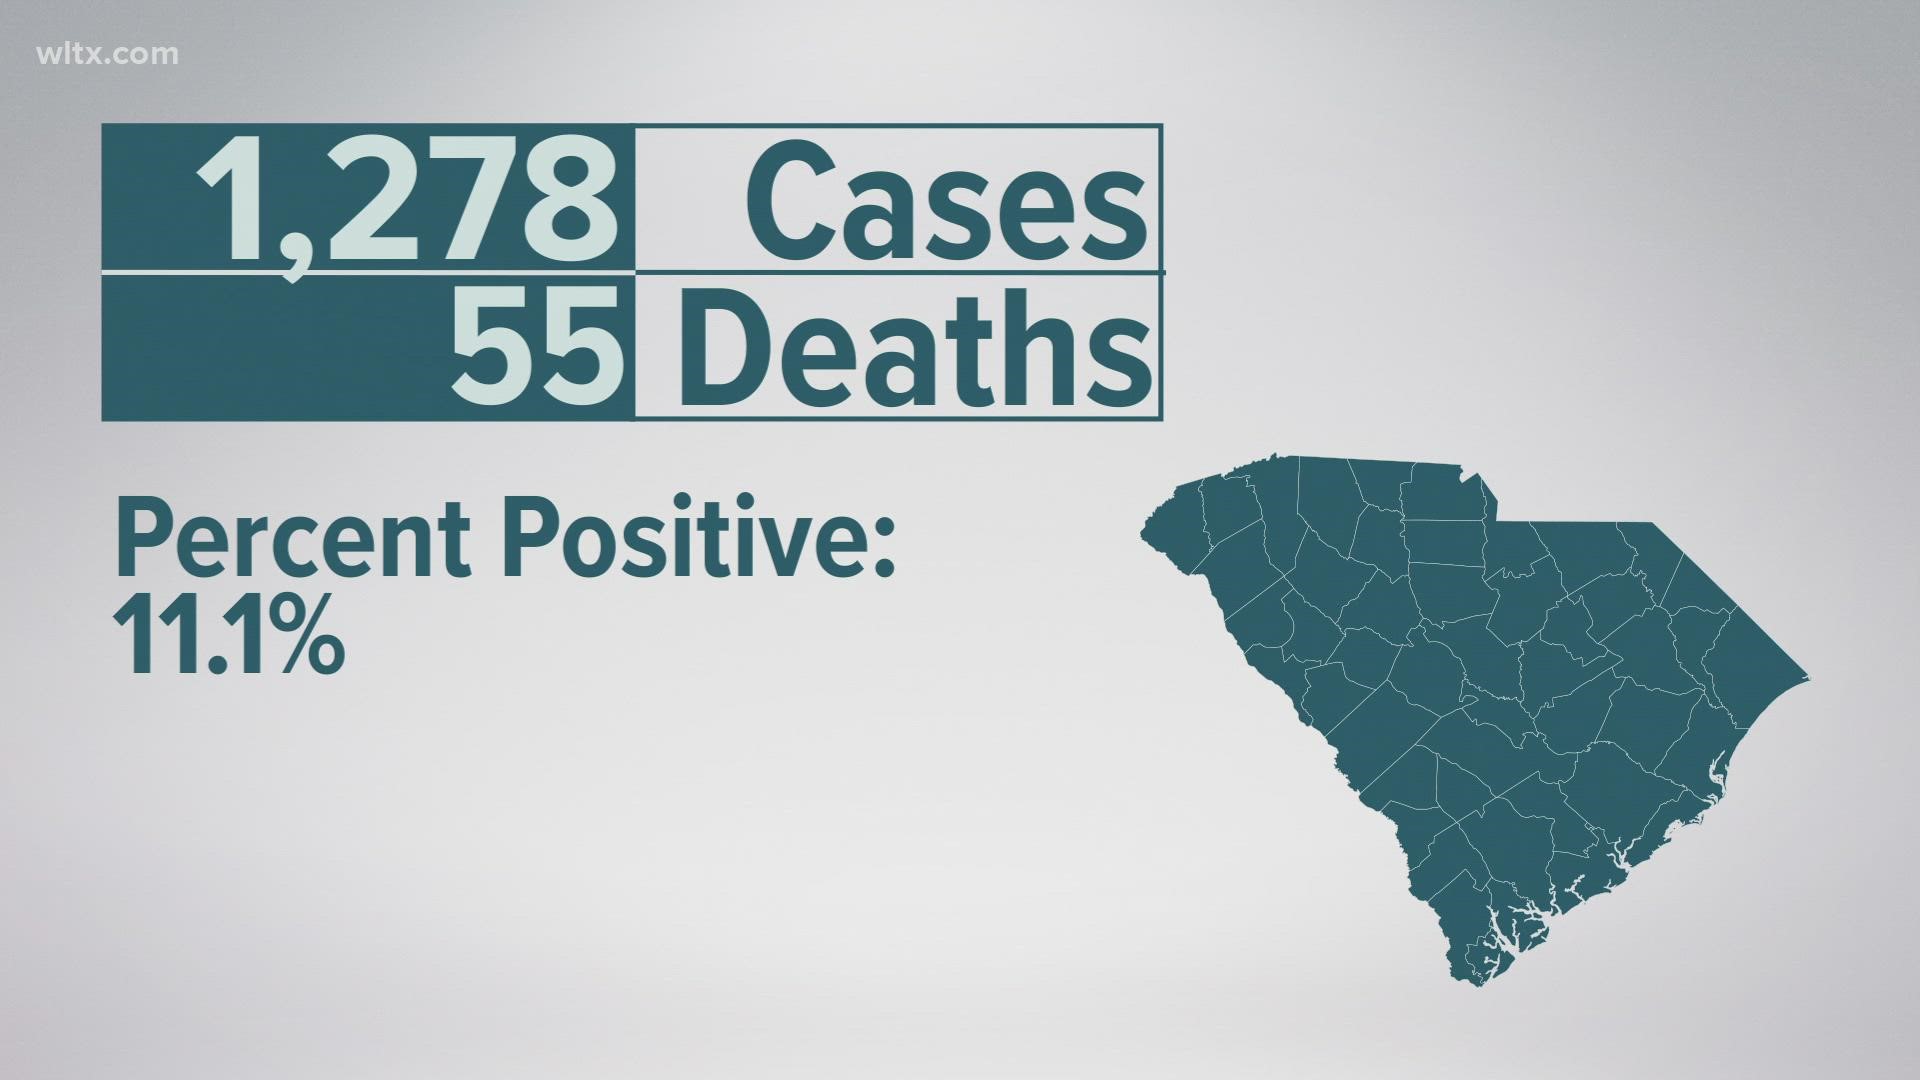 DHEC is reporting 1,278 new cases of the virus with 55 deaths reported.